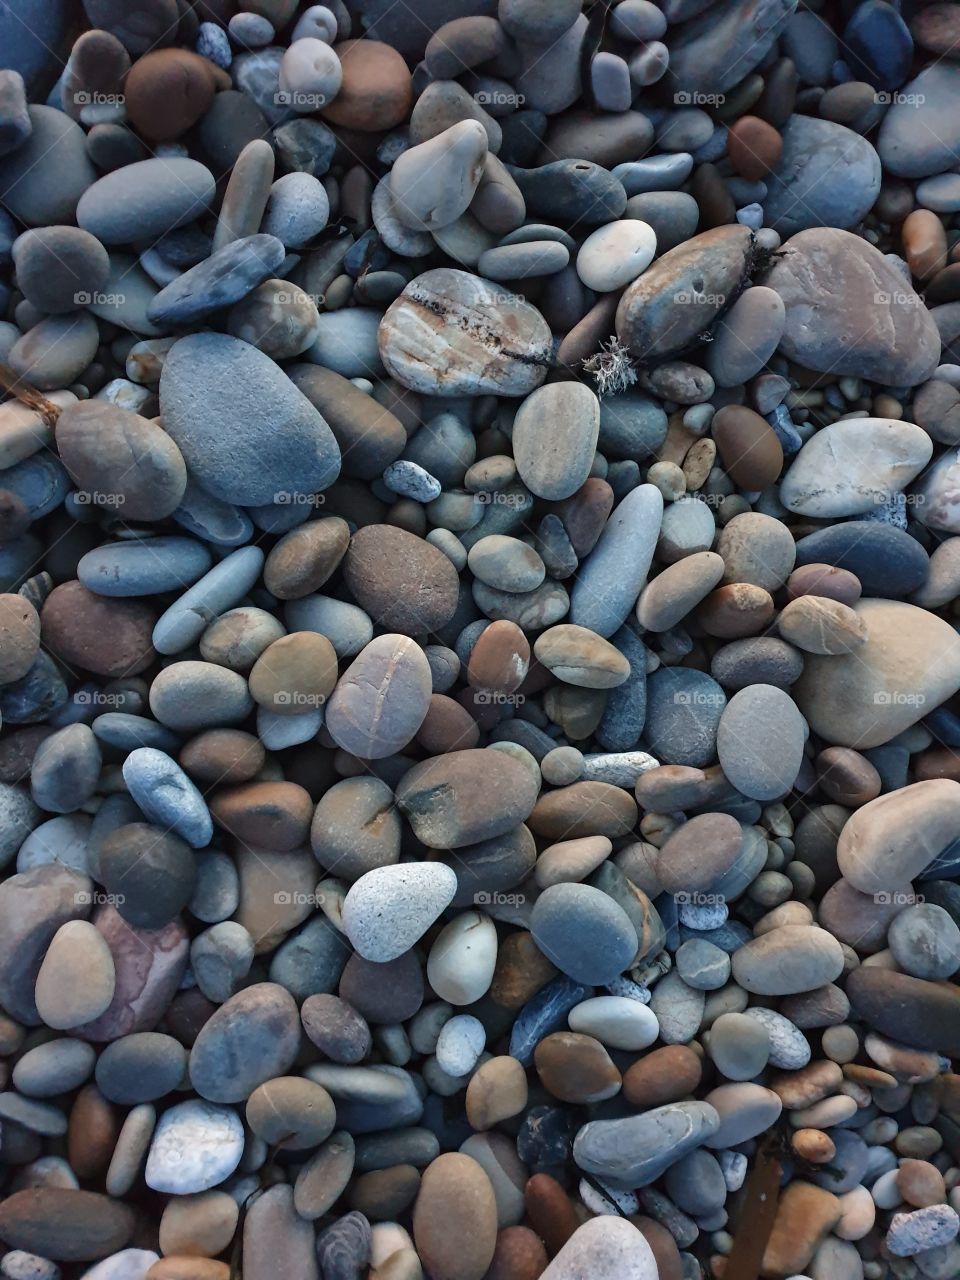 Different pebbles at a beach